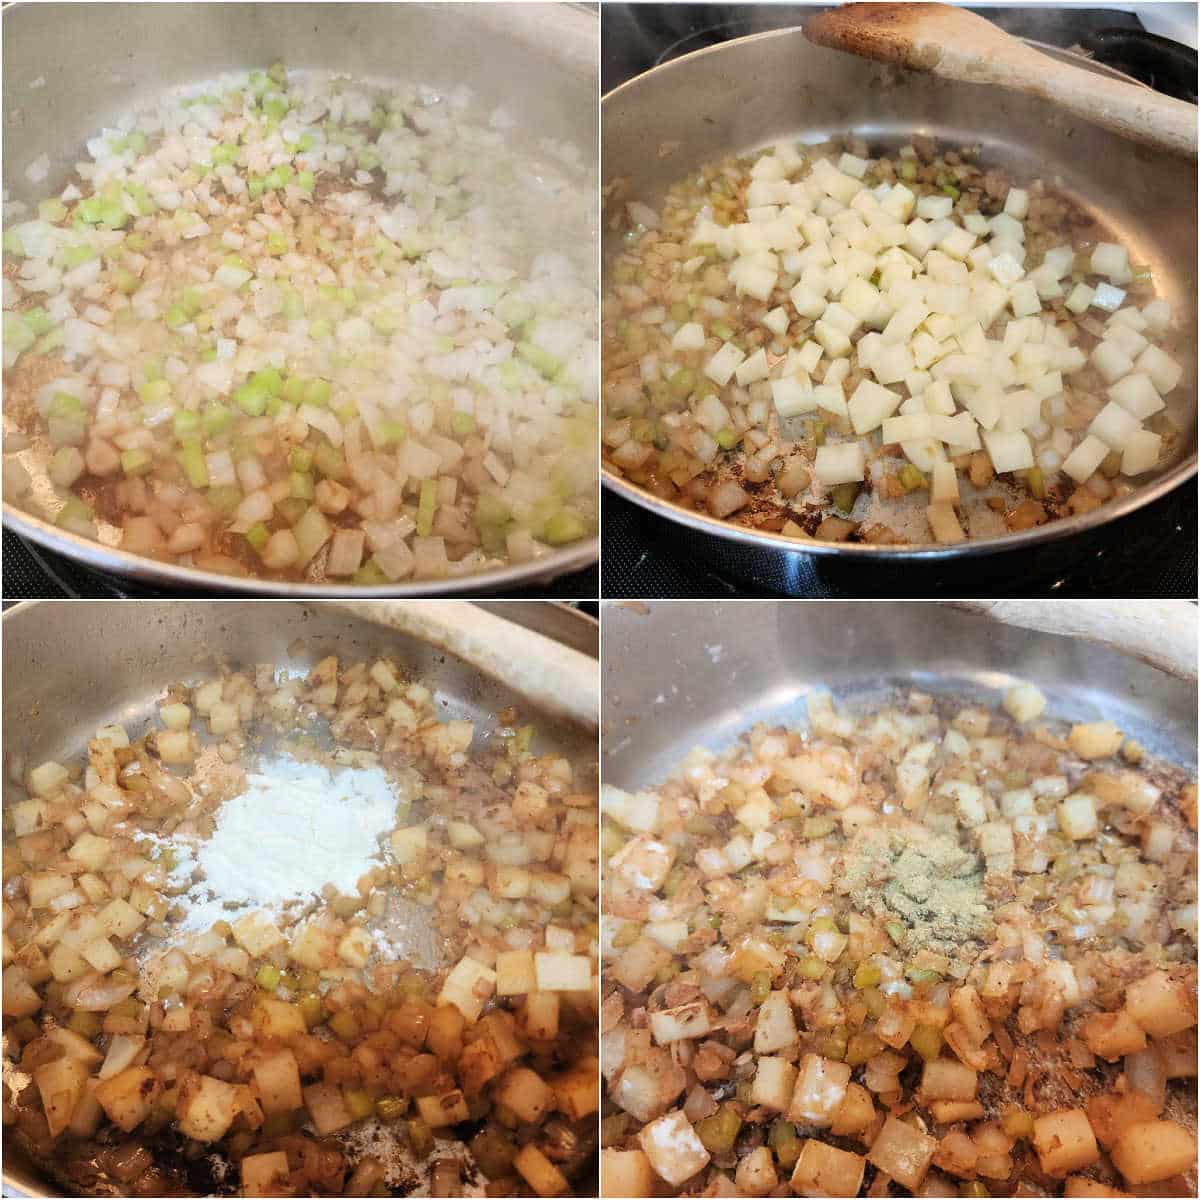 A collage of 4 images: diced onion and celery cooking in a pan, diced potatoes added in, flour added once potatoes are a bit brown, and finally poultry seasoning added into the pan on top of the vegetables.